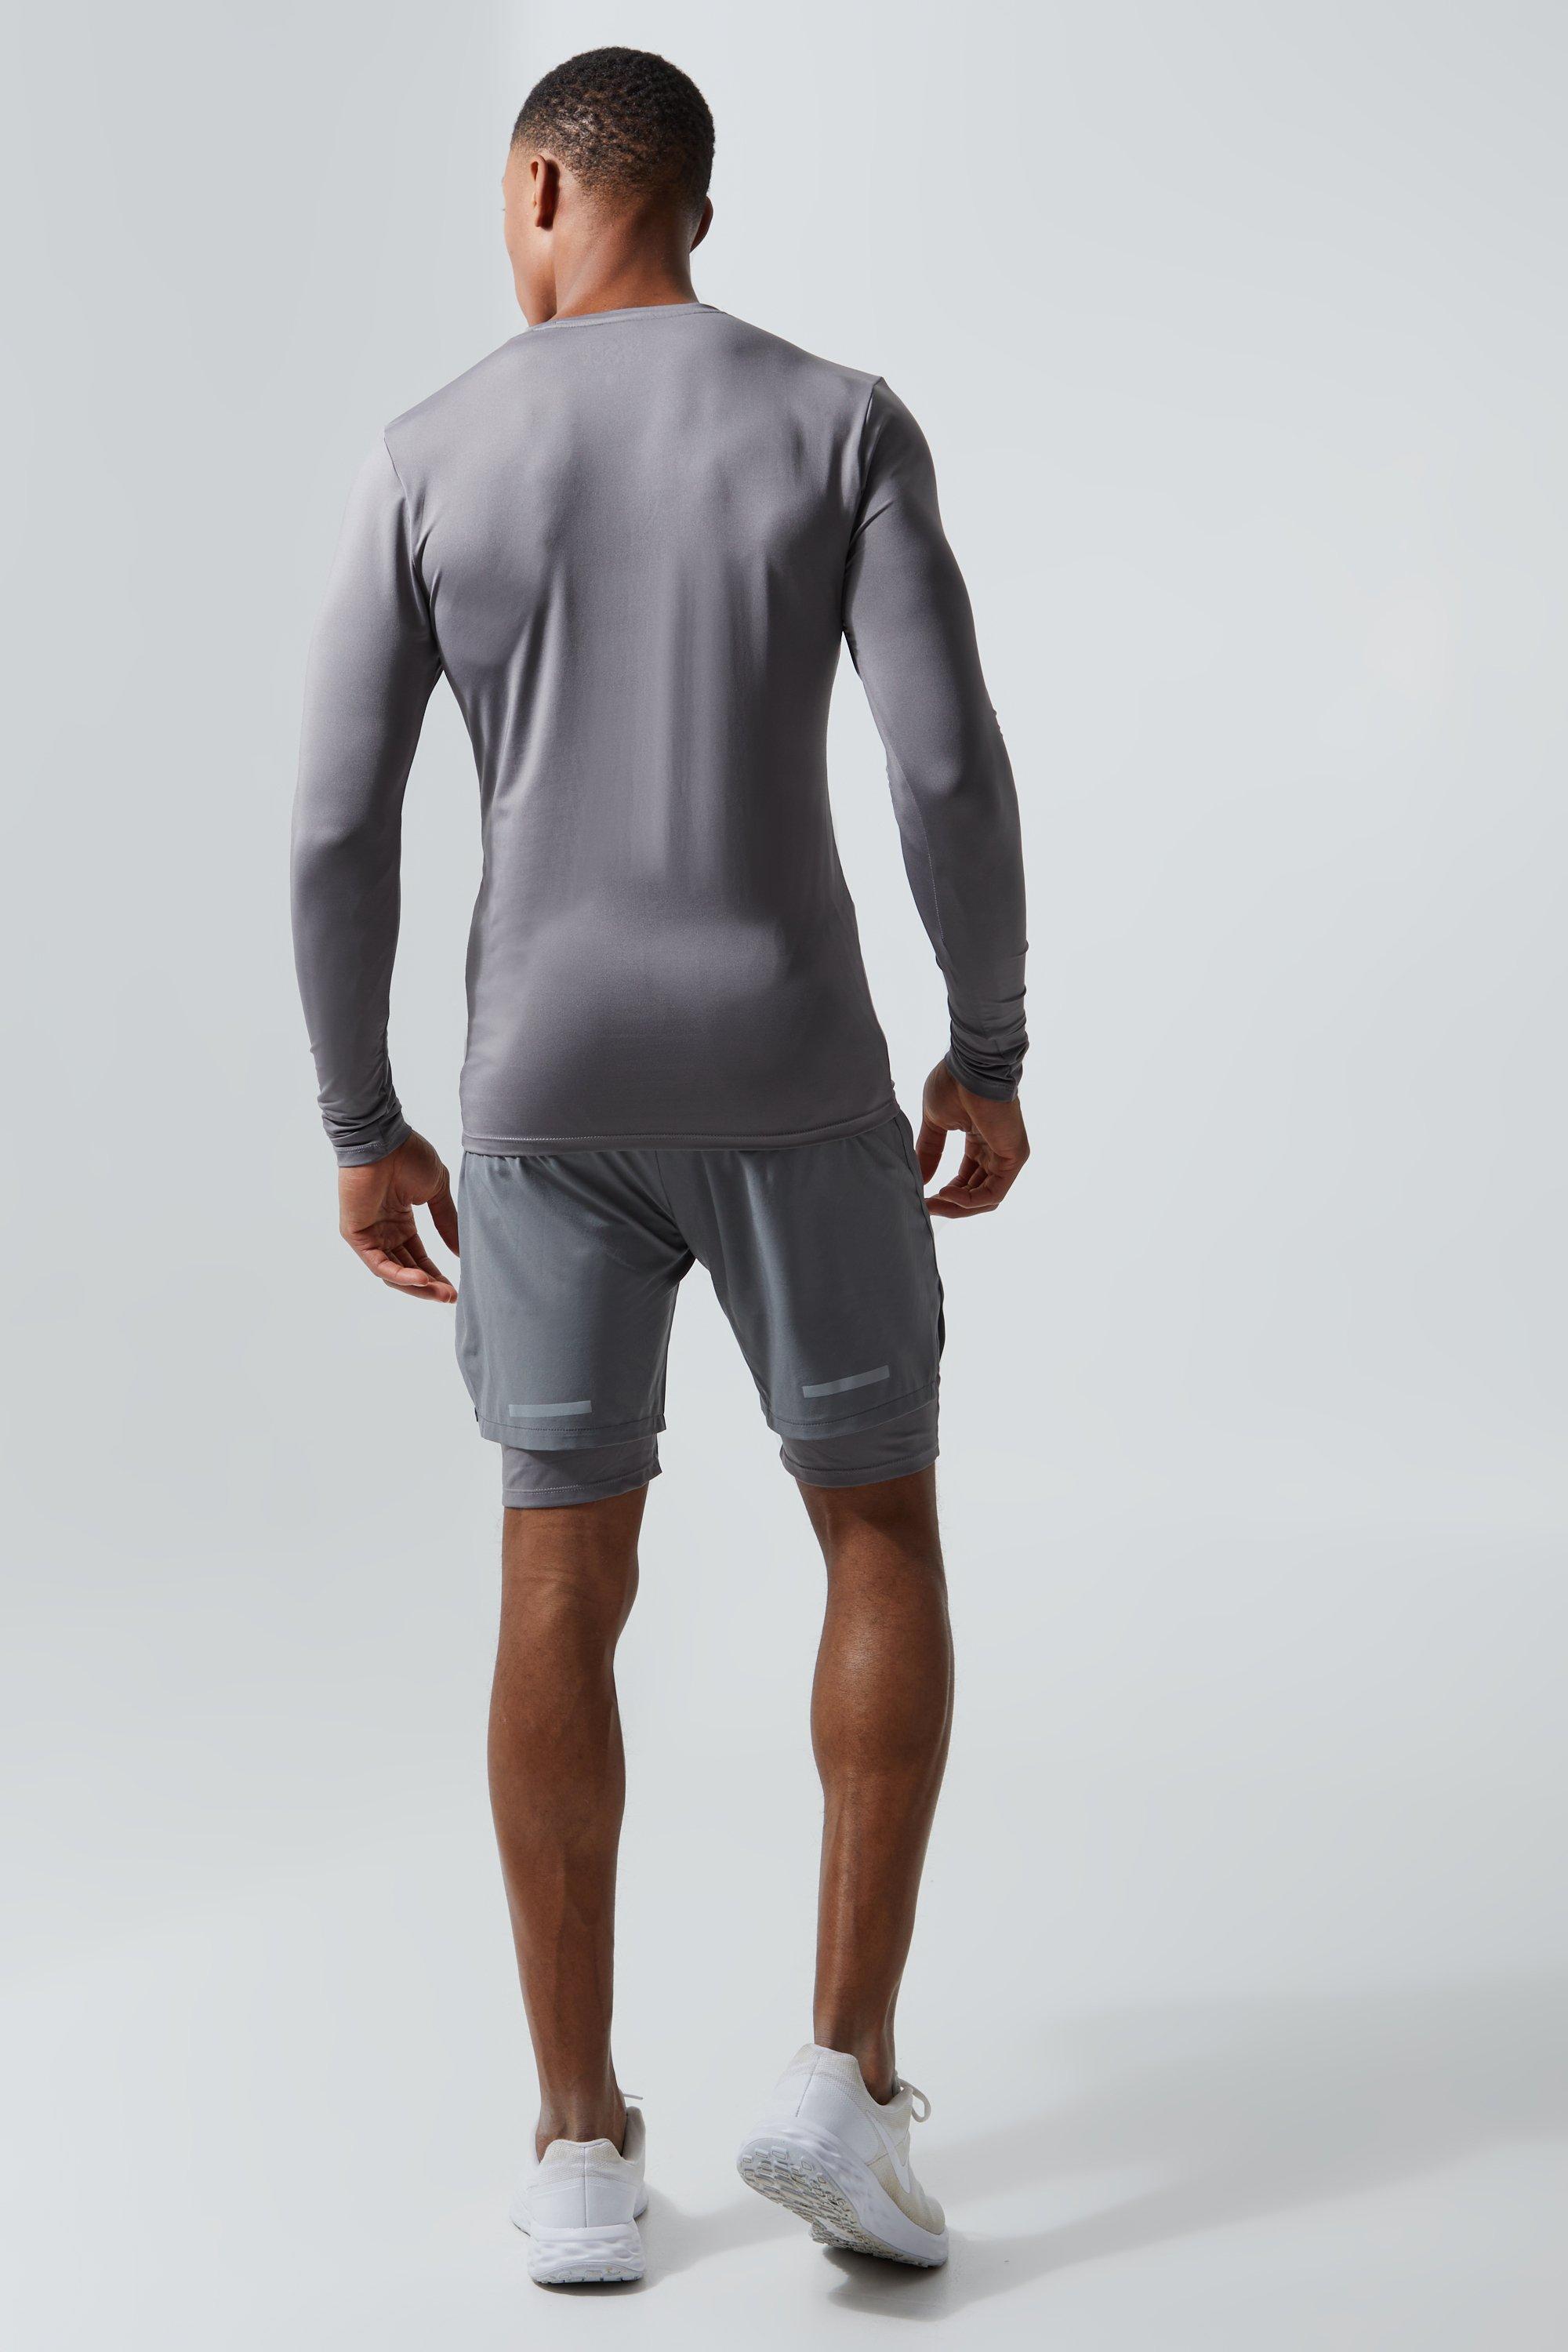 Active Raglan Muscle Fit Compression Top